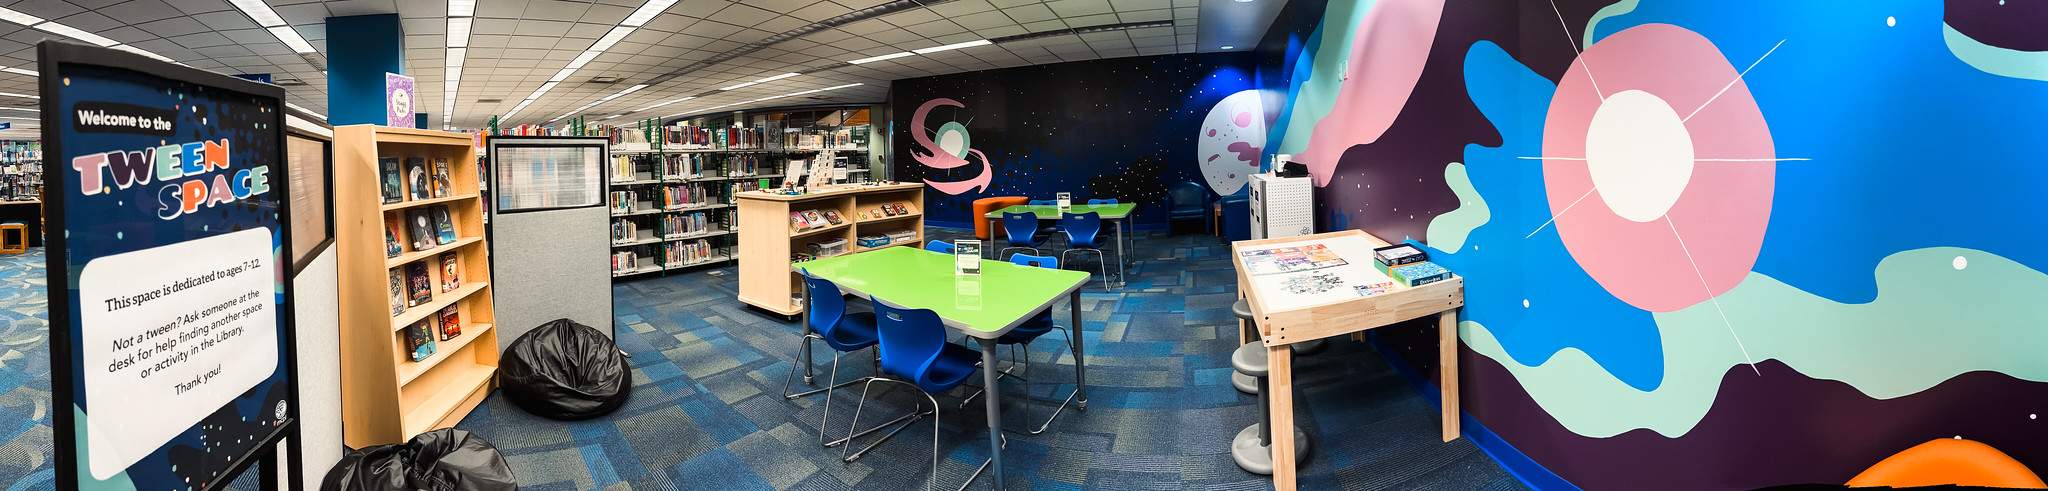 image of Tween Space with night sky cosmos graphics on the wall